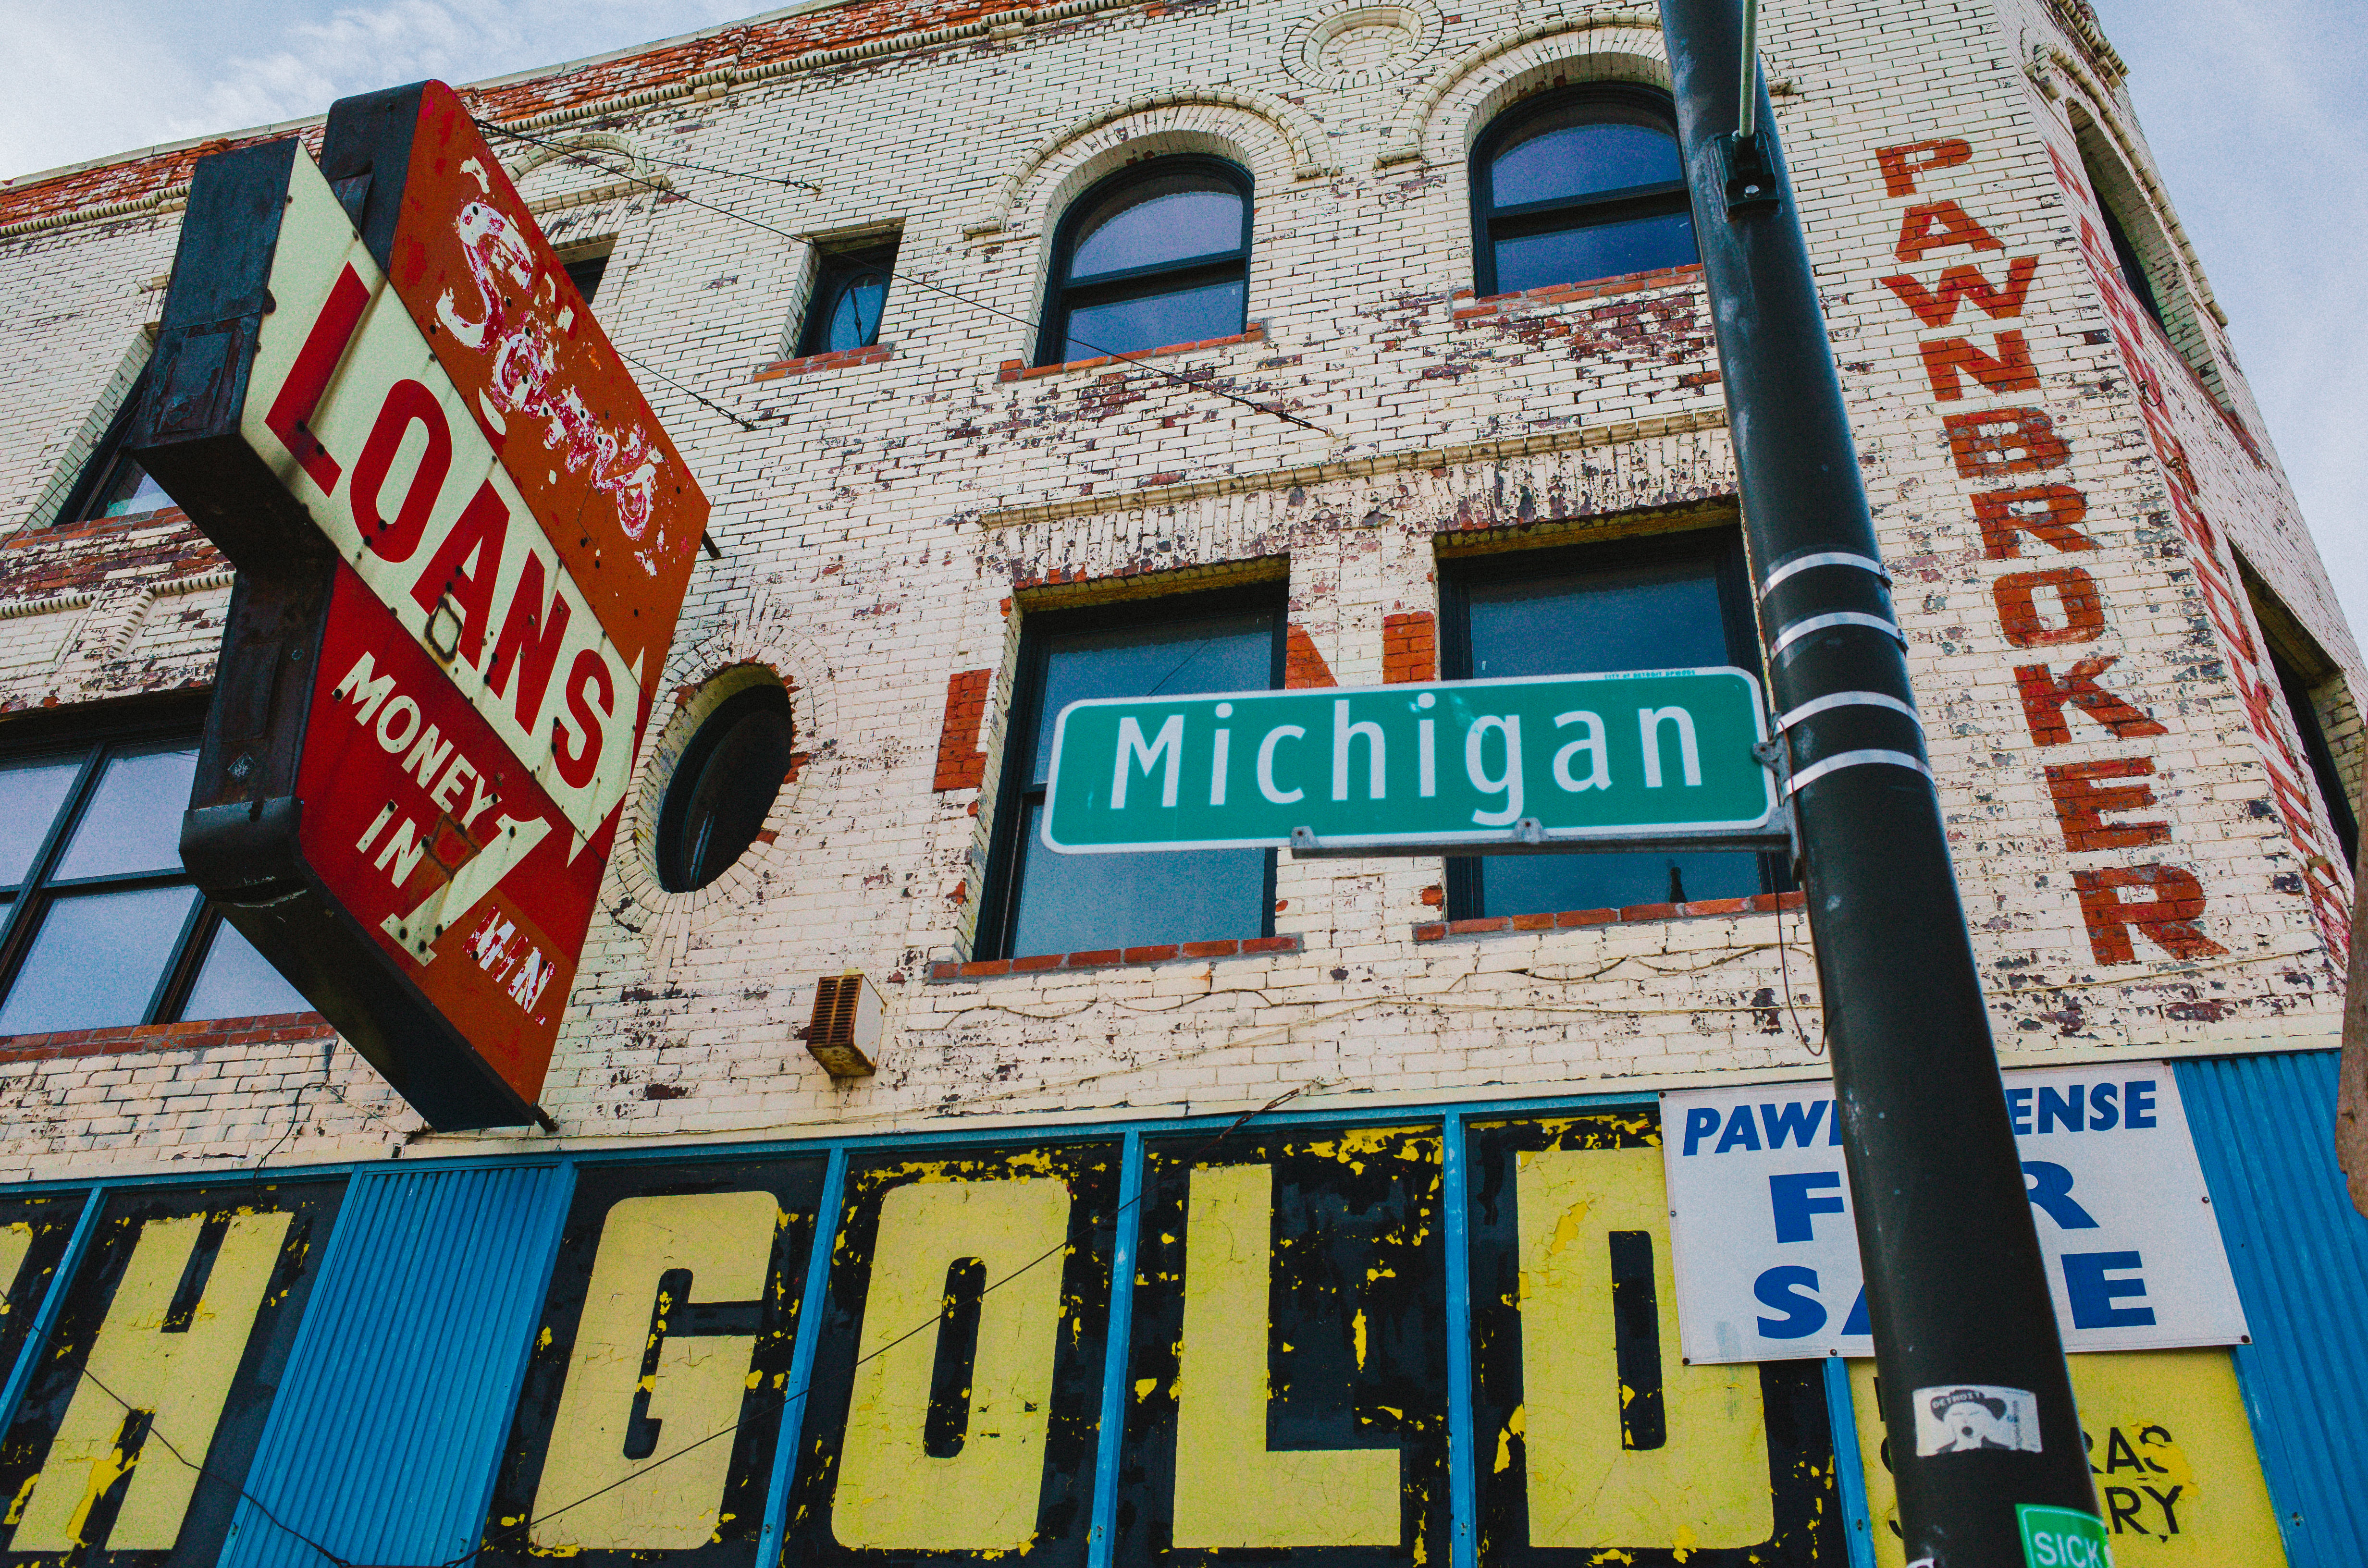 eric kim street photography - Only in America-12 urban landscape detroit gold michigan loans